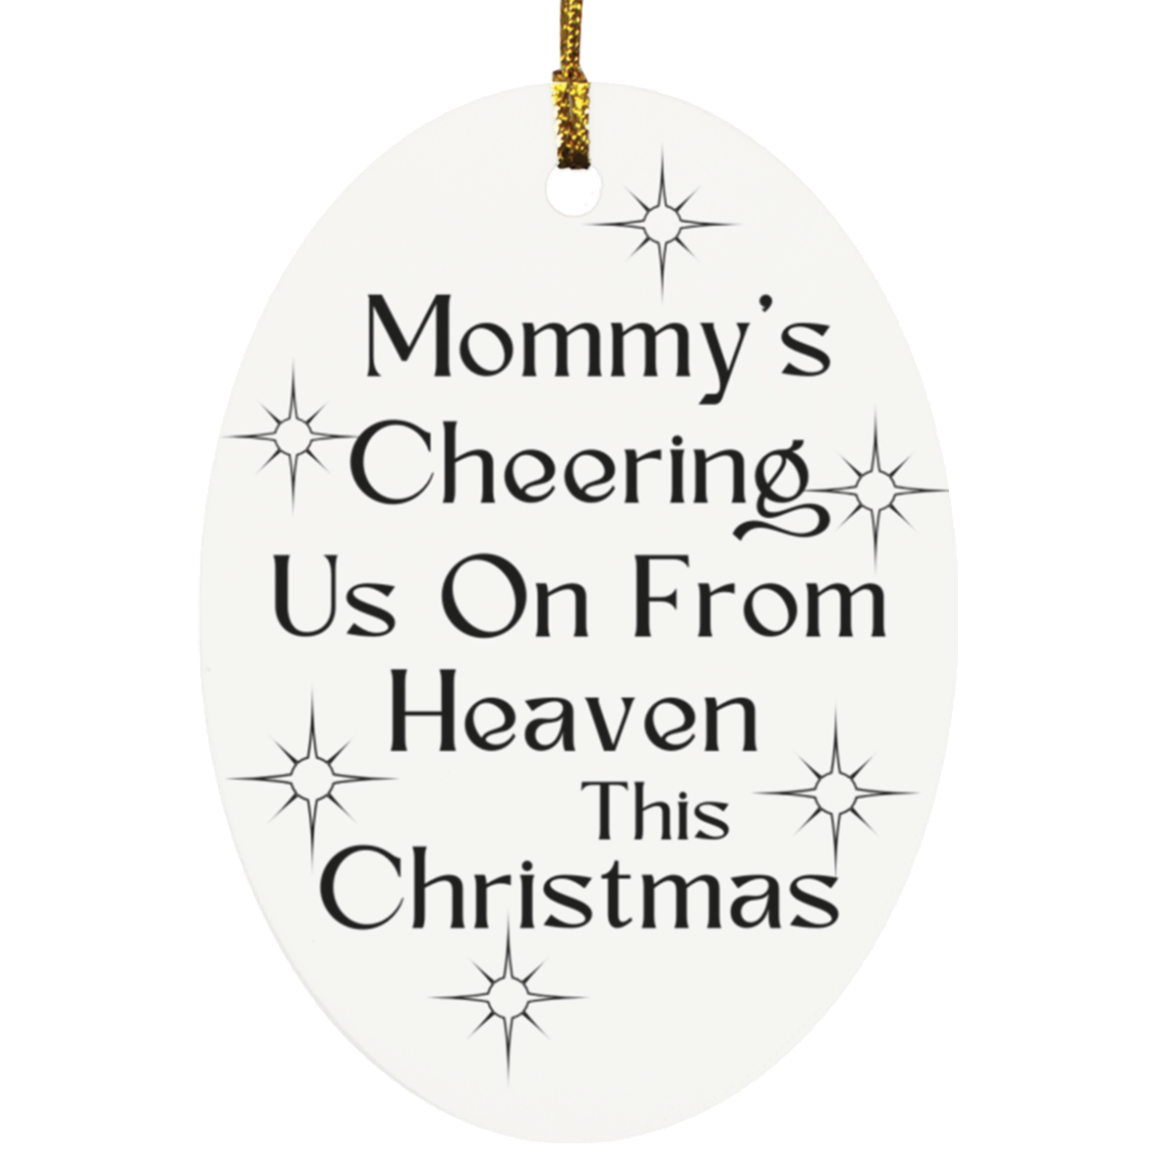 Mommy In Heaven Christmas Ornament, Mother Memorial for Christmas, Loss of Mom